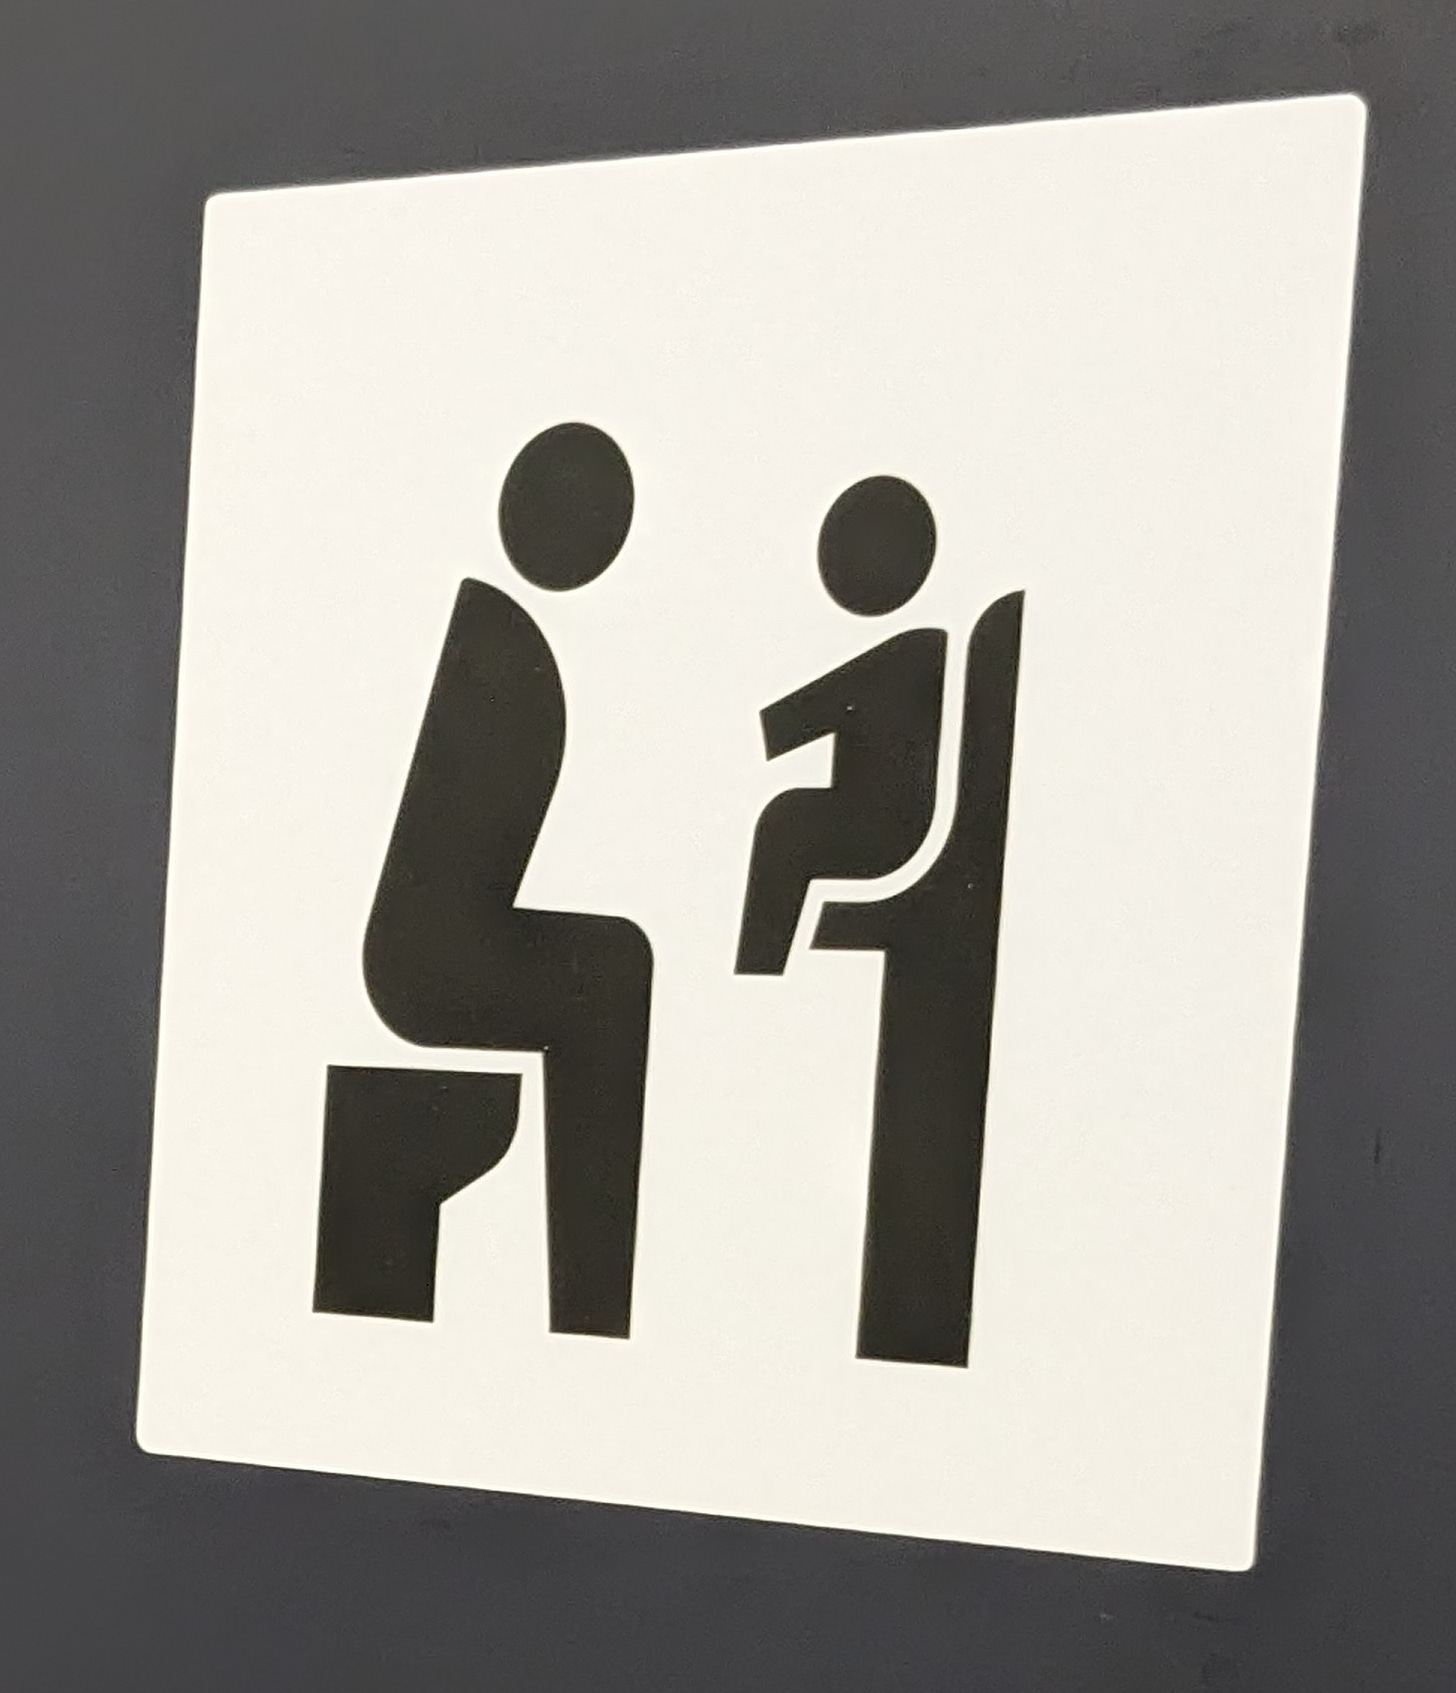 Graphic of a parent seated on a toilet facing a toddler seated on a wall-mounted toddler seat